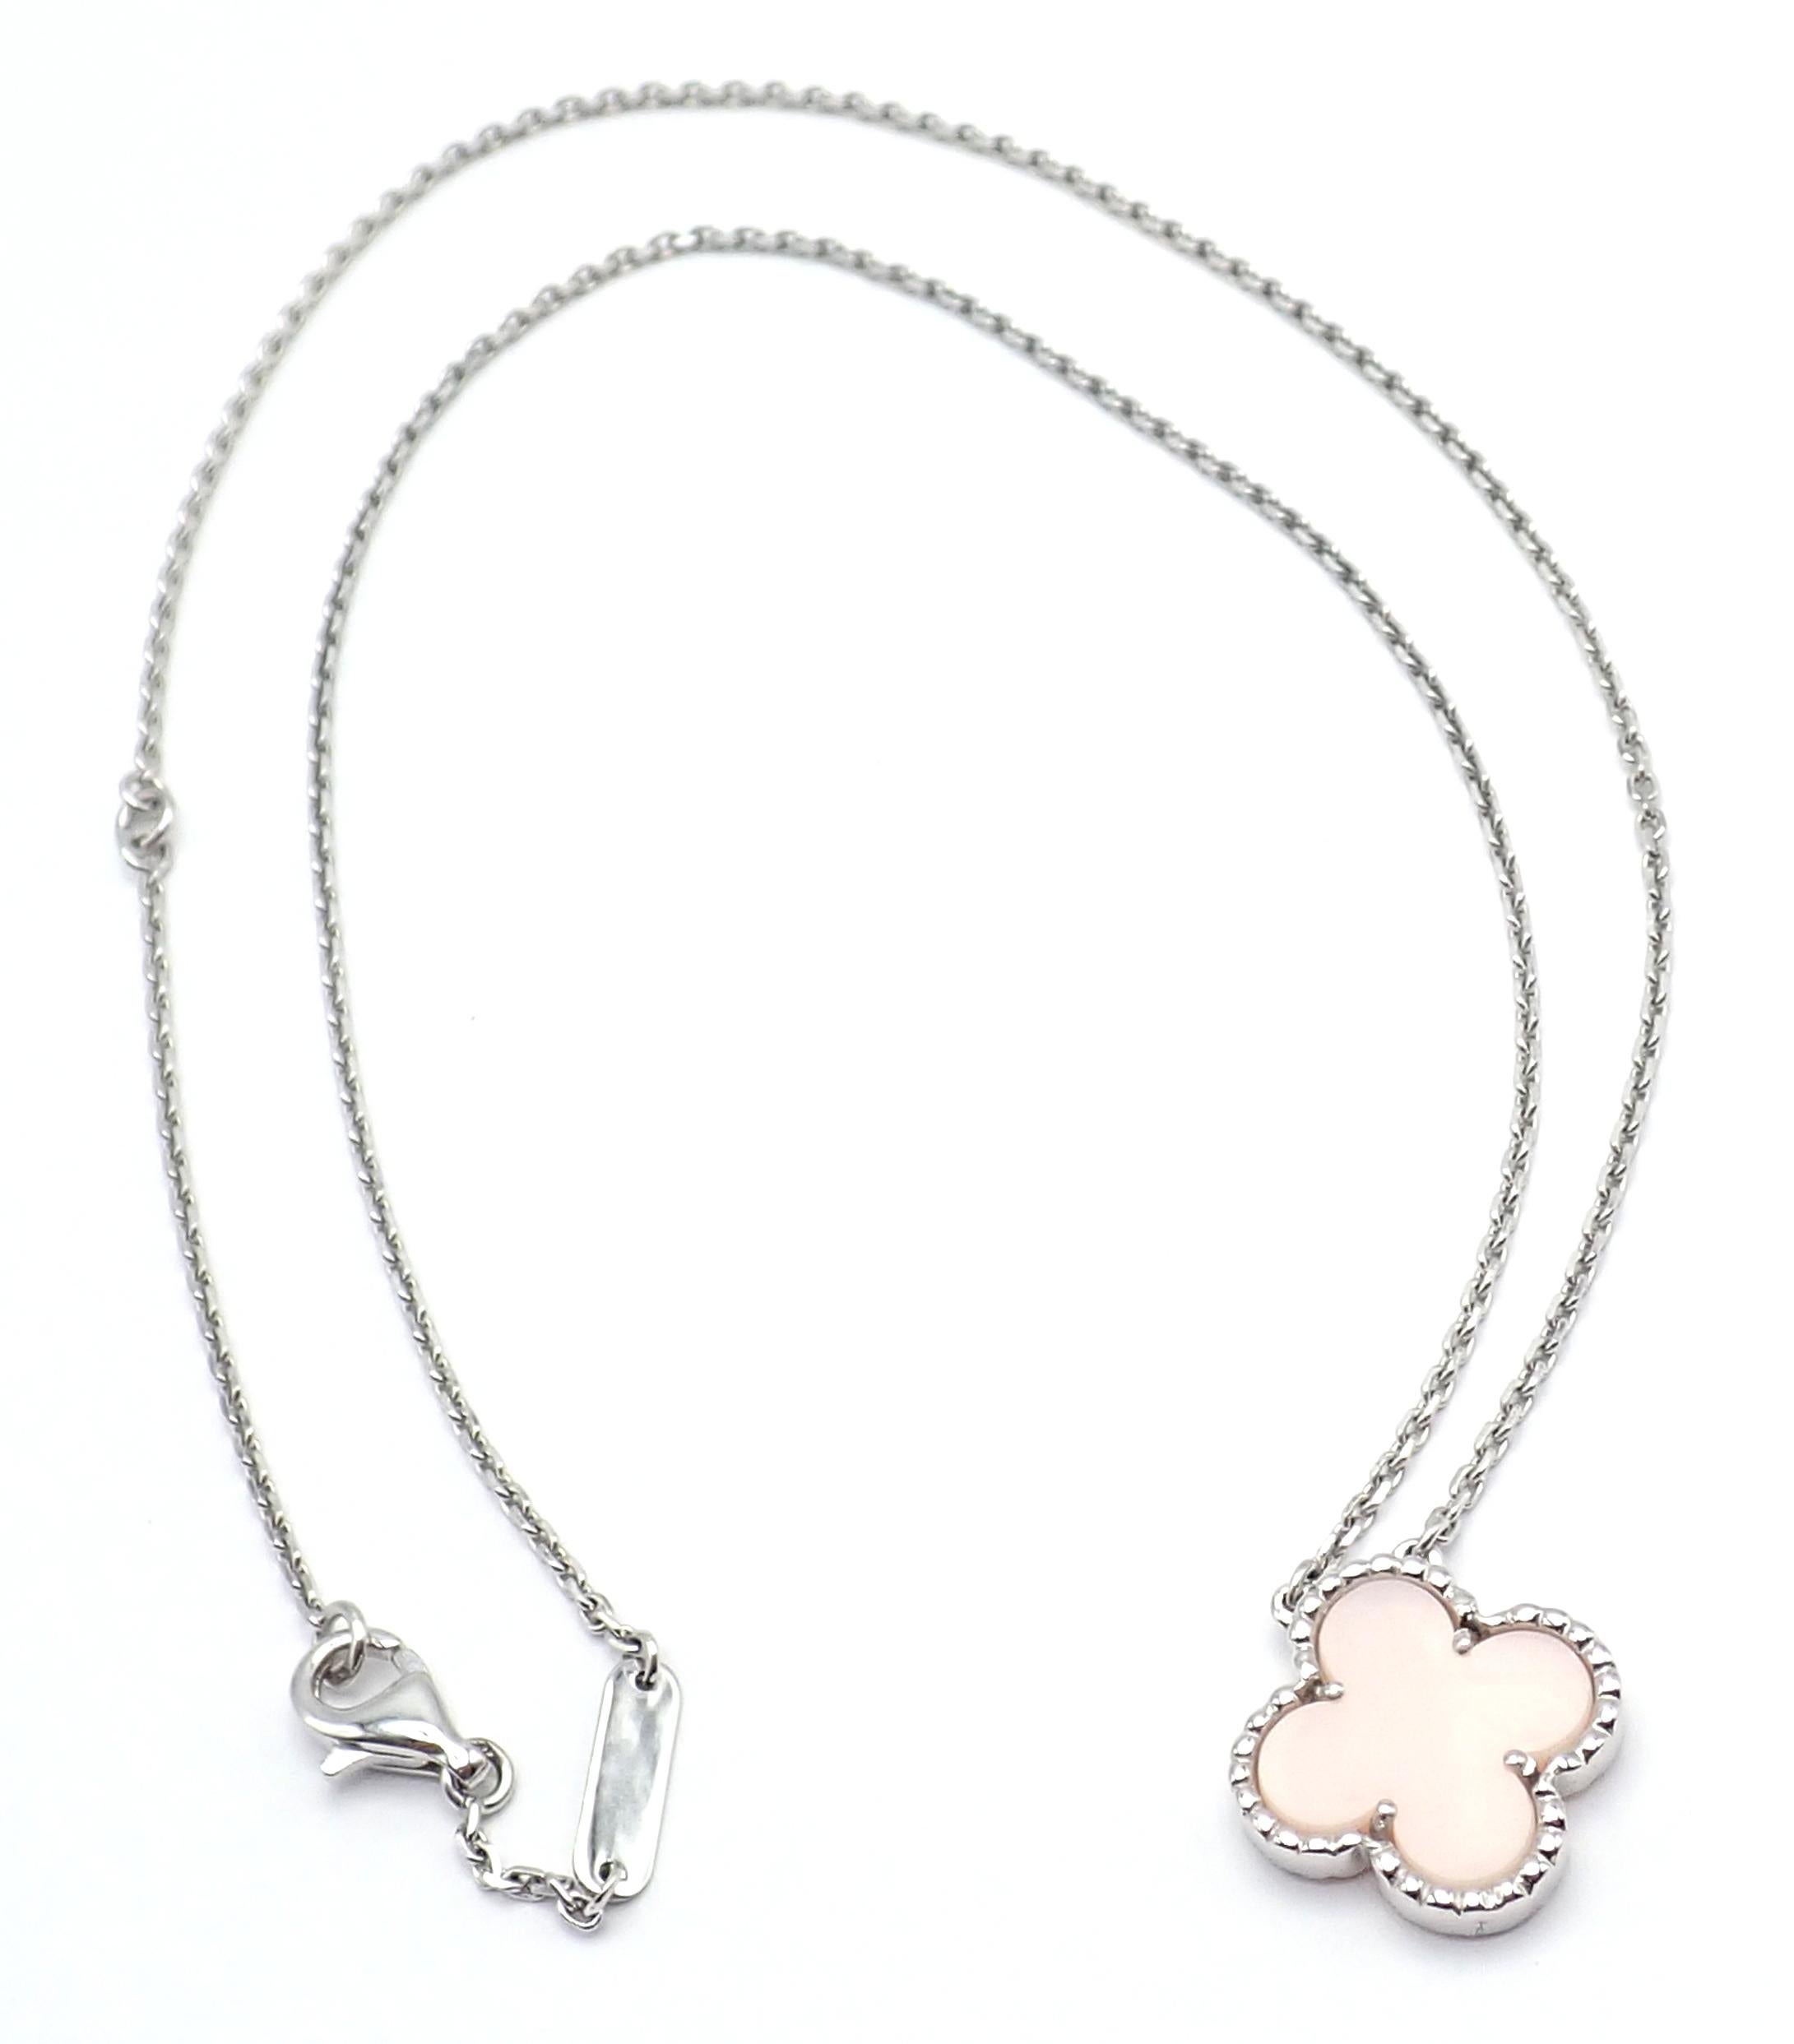 18k White Gold Vintage Alhambra Pink Opal Necklace By Van Cleef & Arpels.
With 1 alhambra shape pink opal stone: 15mm.
This necklace comes with Van Cleef & Arpels certificate of authenticity.
 Details:
 Length: 16.75